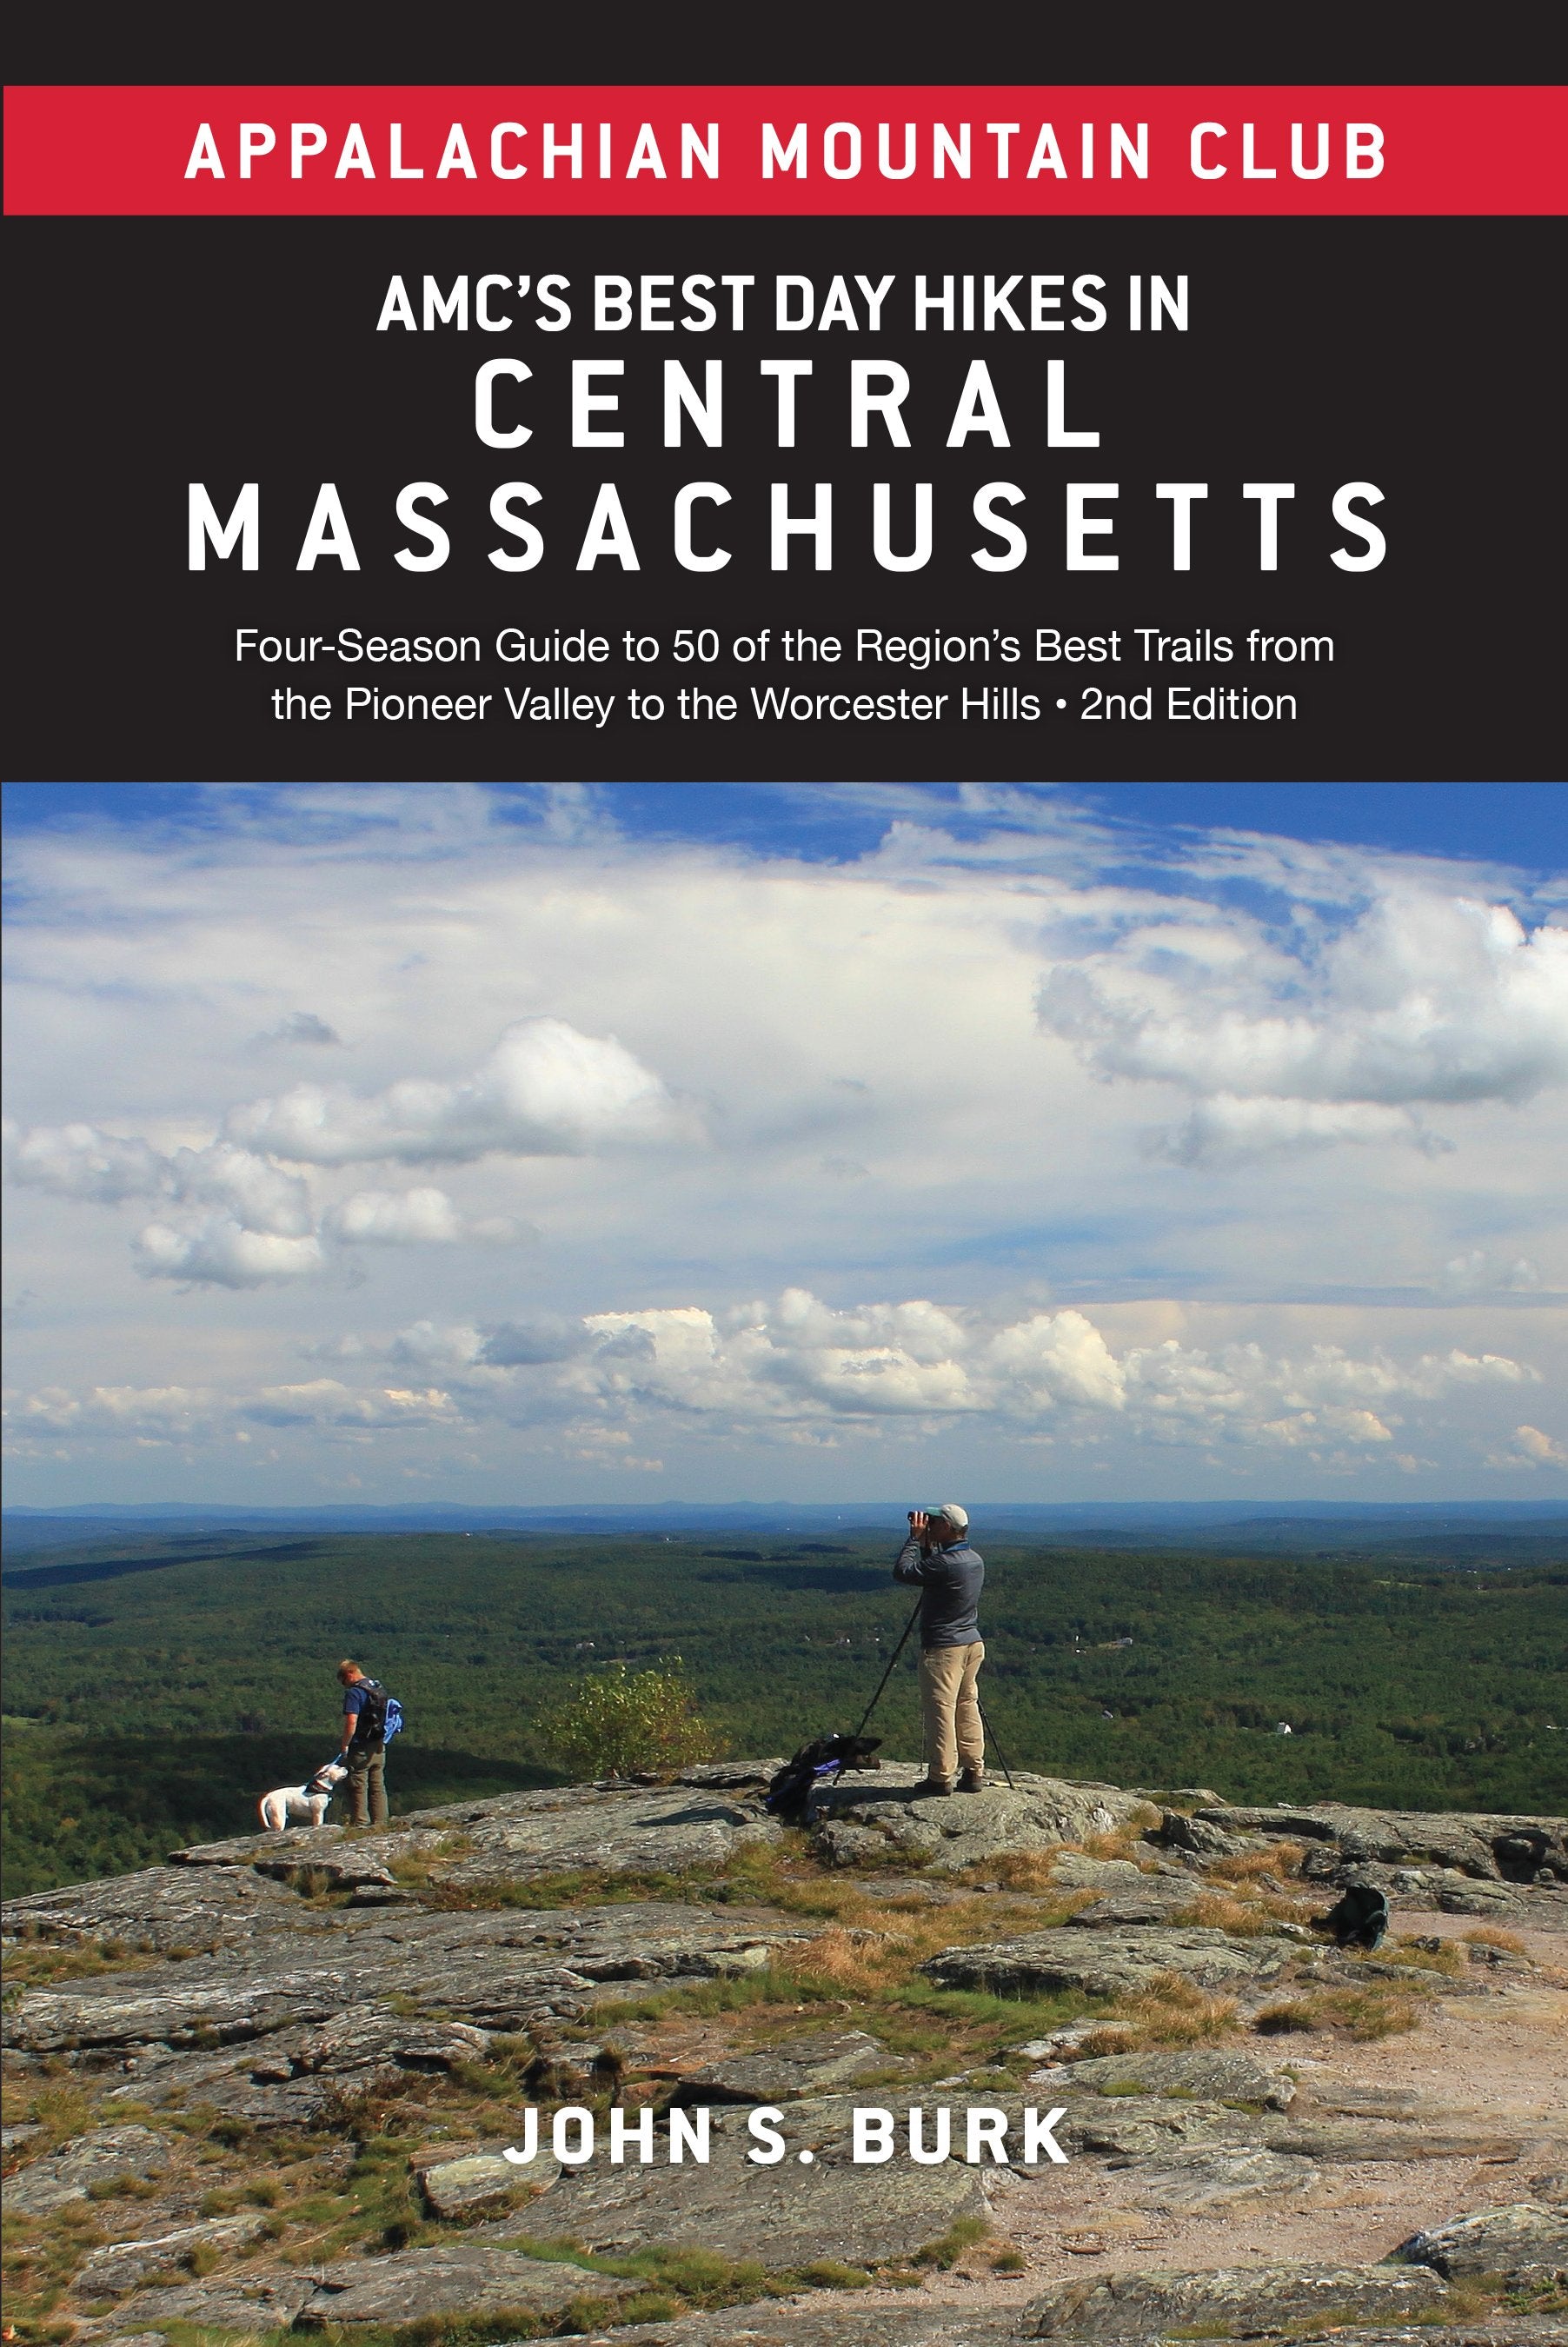 AMC's Best Day Hikes in Central Massachusetts, 2nd Edition